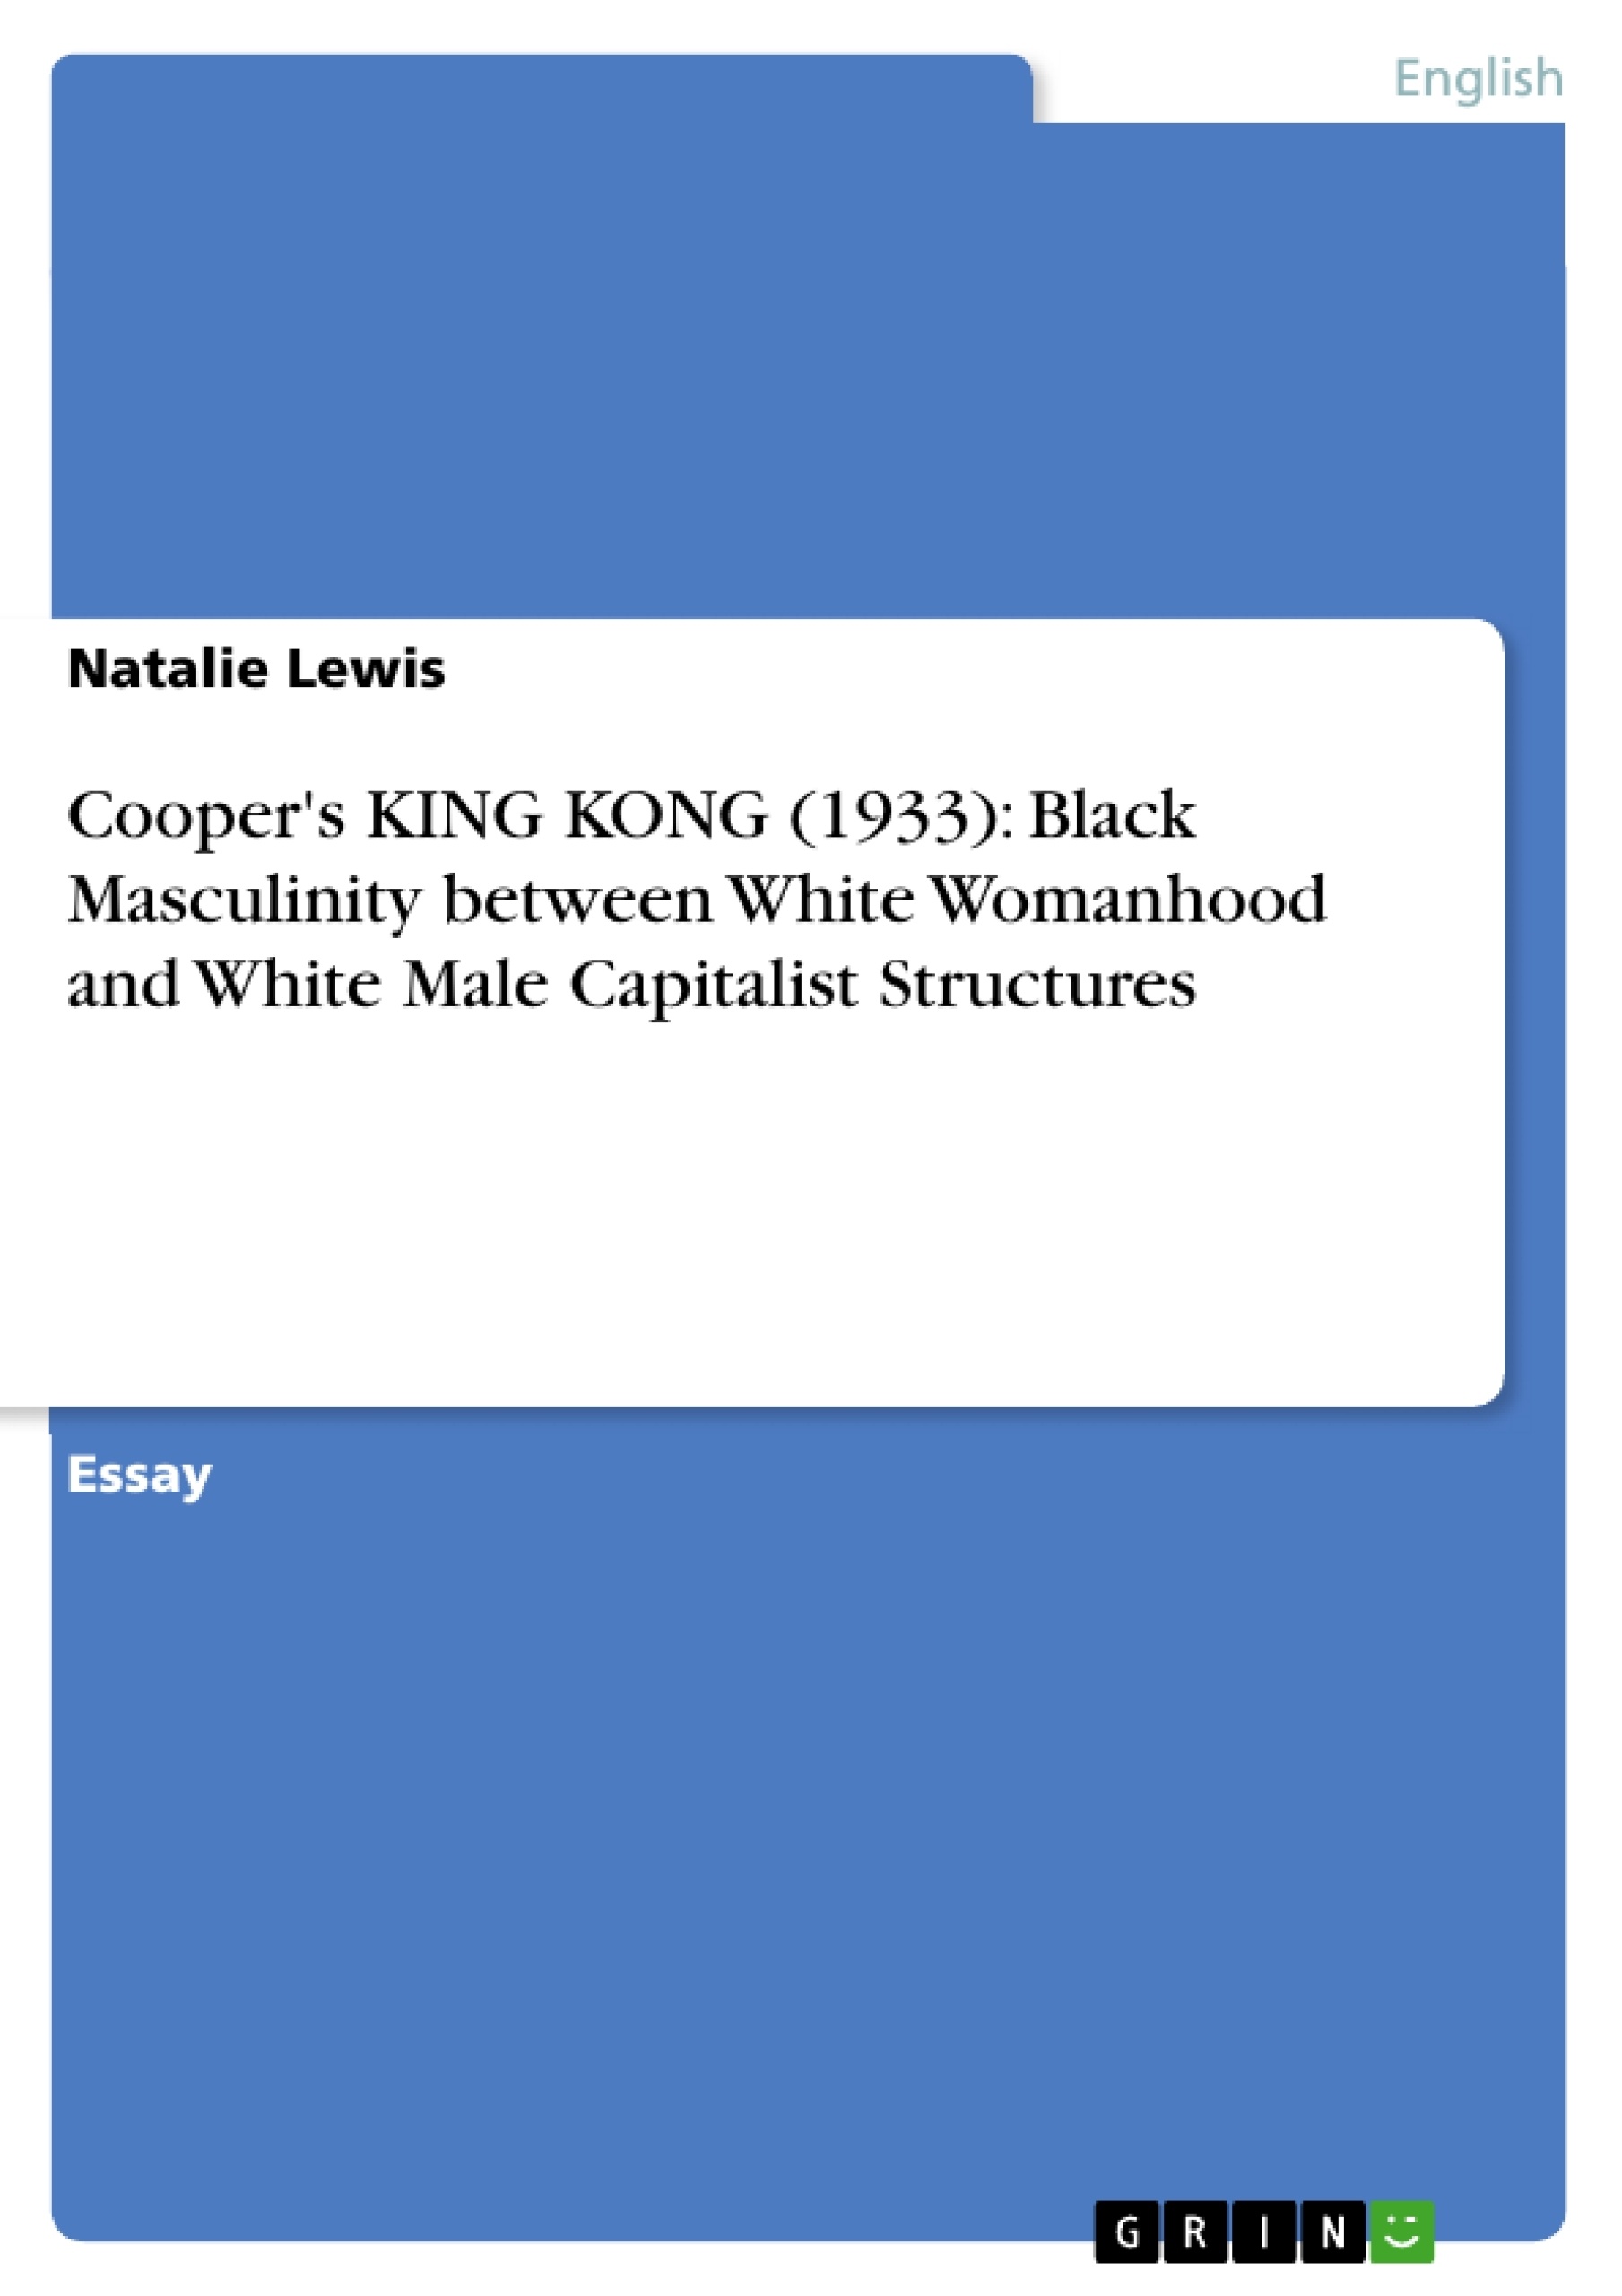 Título: Cooper's KING KONG (1933): Black Masculinity between White Womanhood and White Male Capitalist Structures